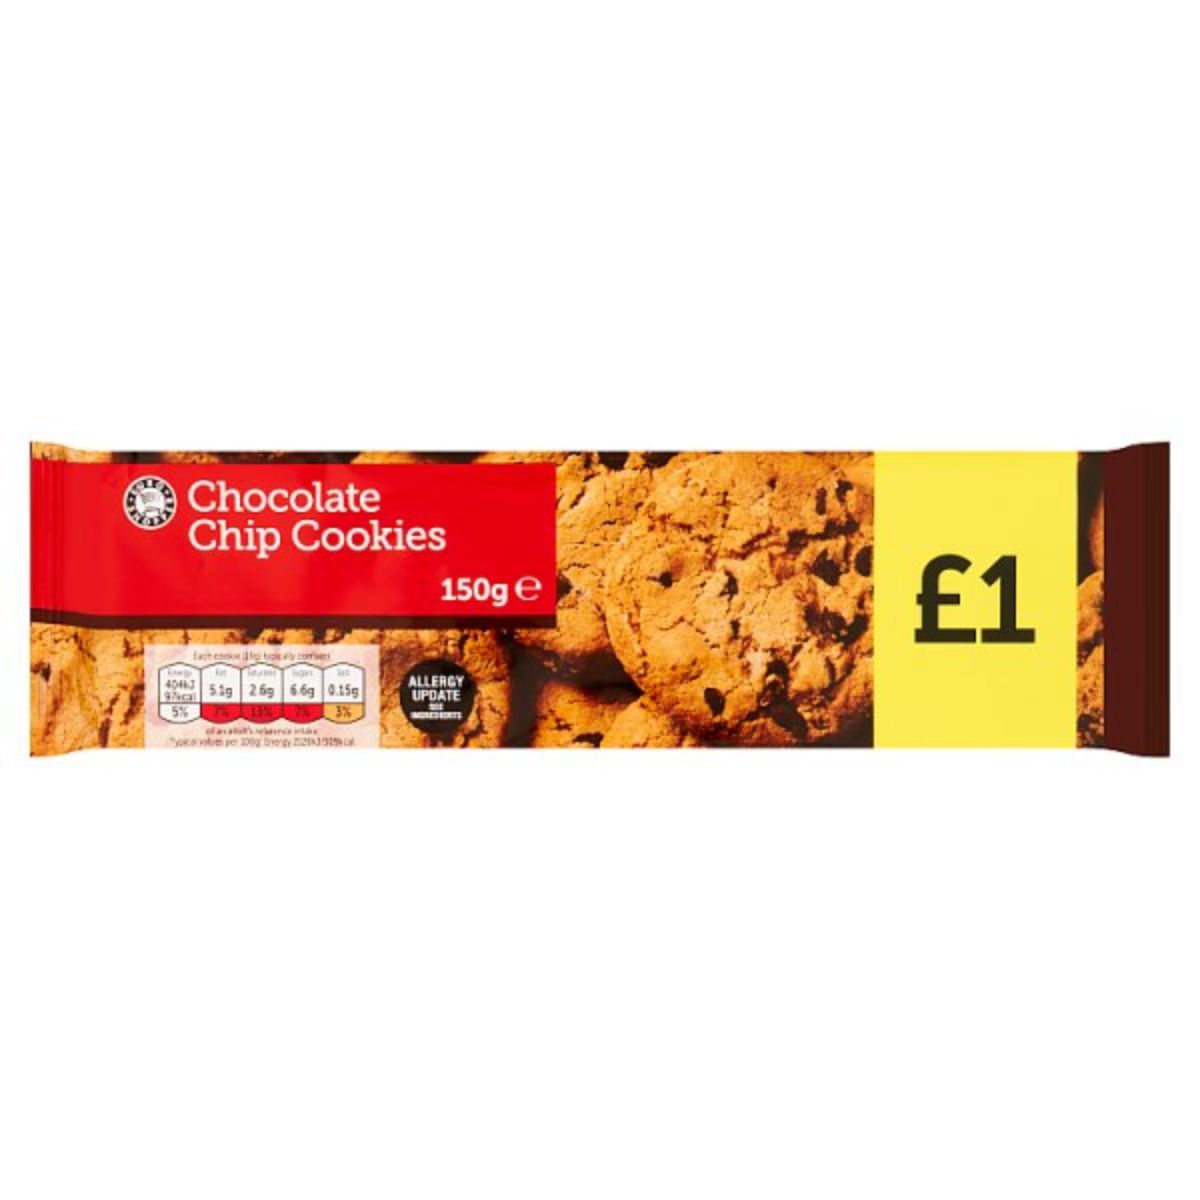 A bar of Euro shopper - Chocolate Chip Cookies - 150g on a white background.